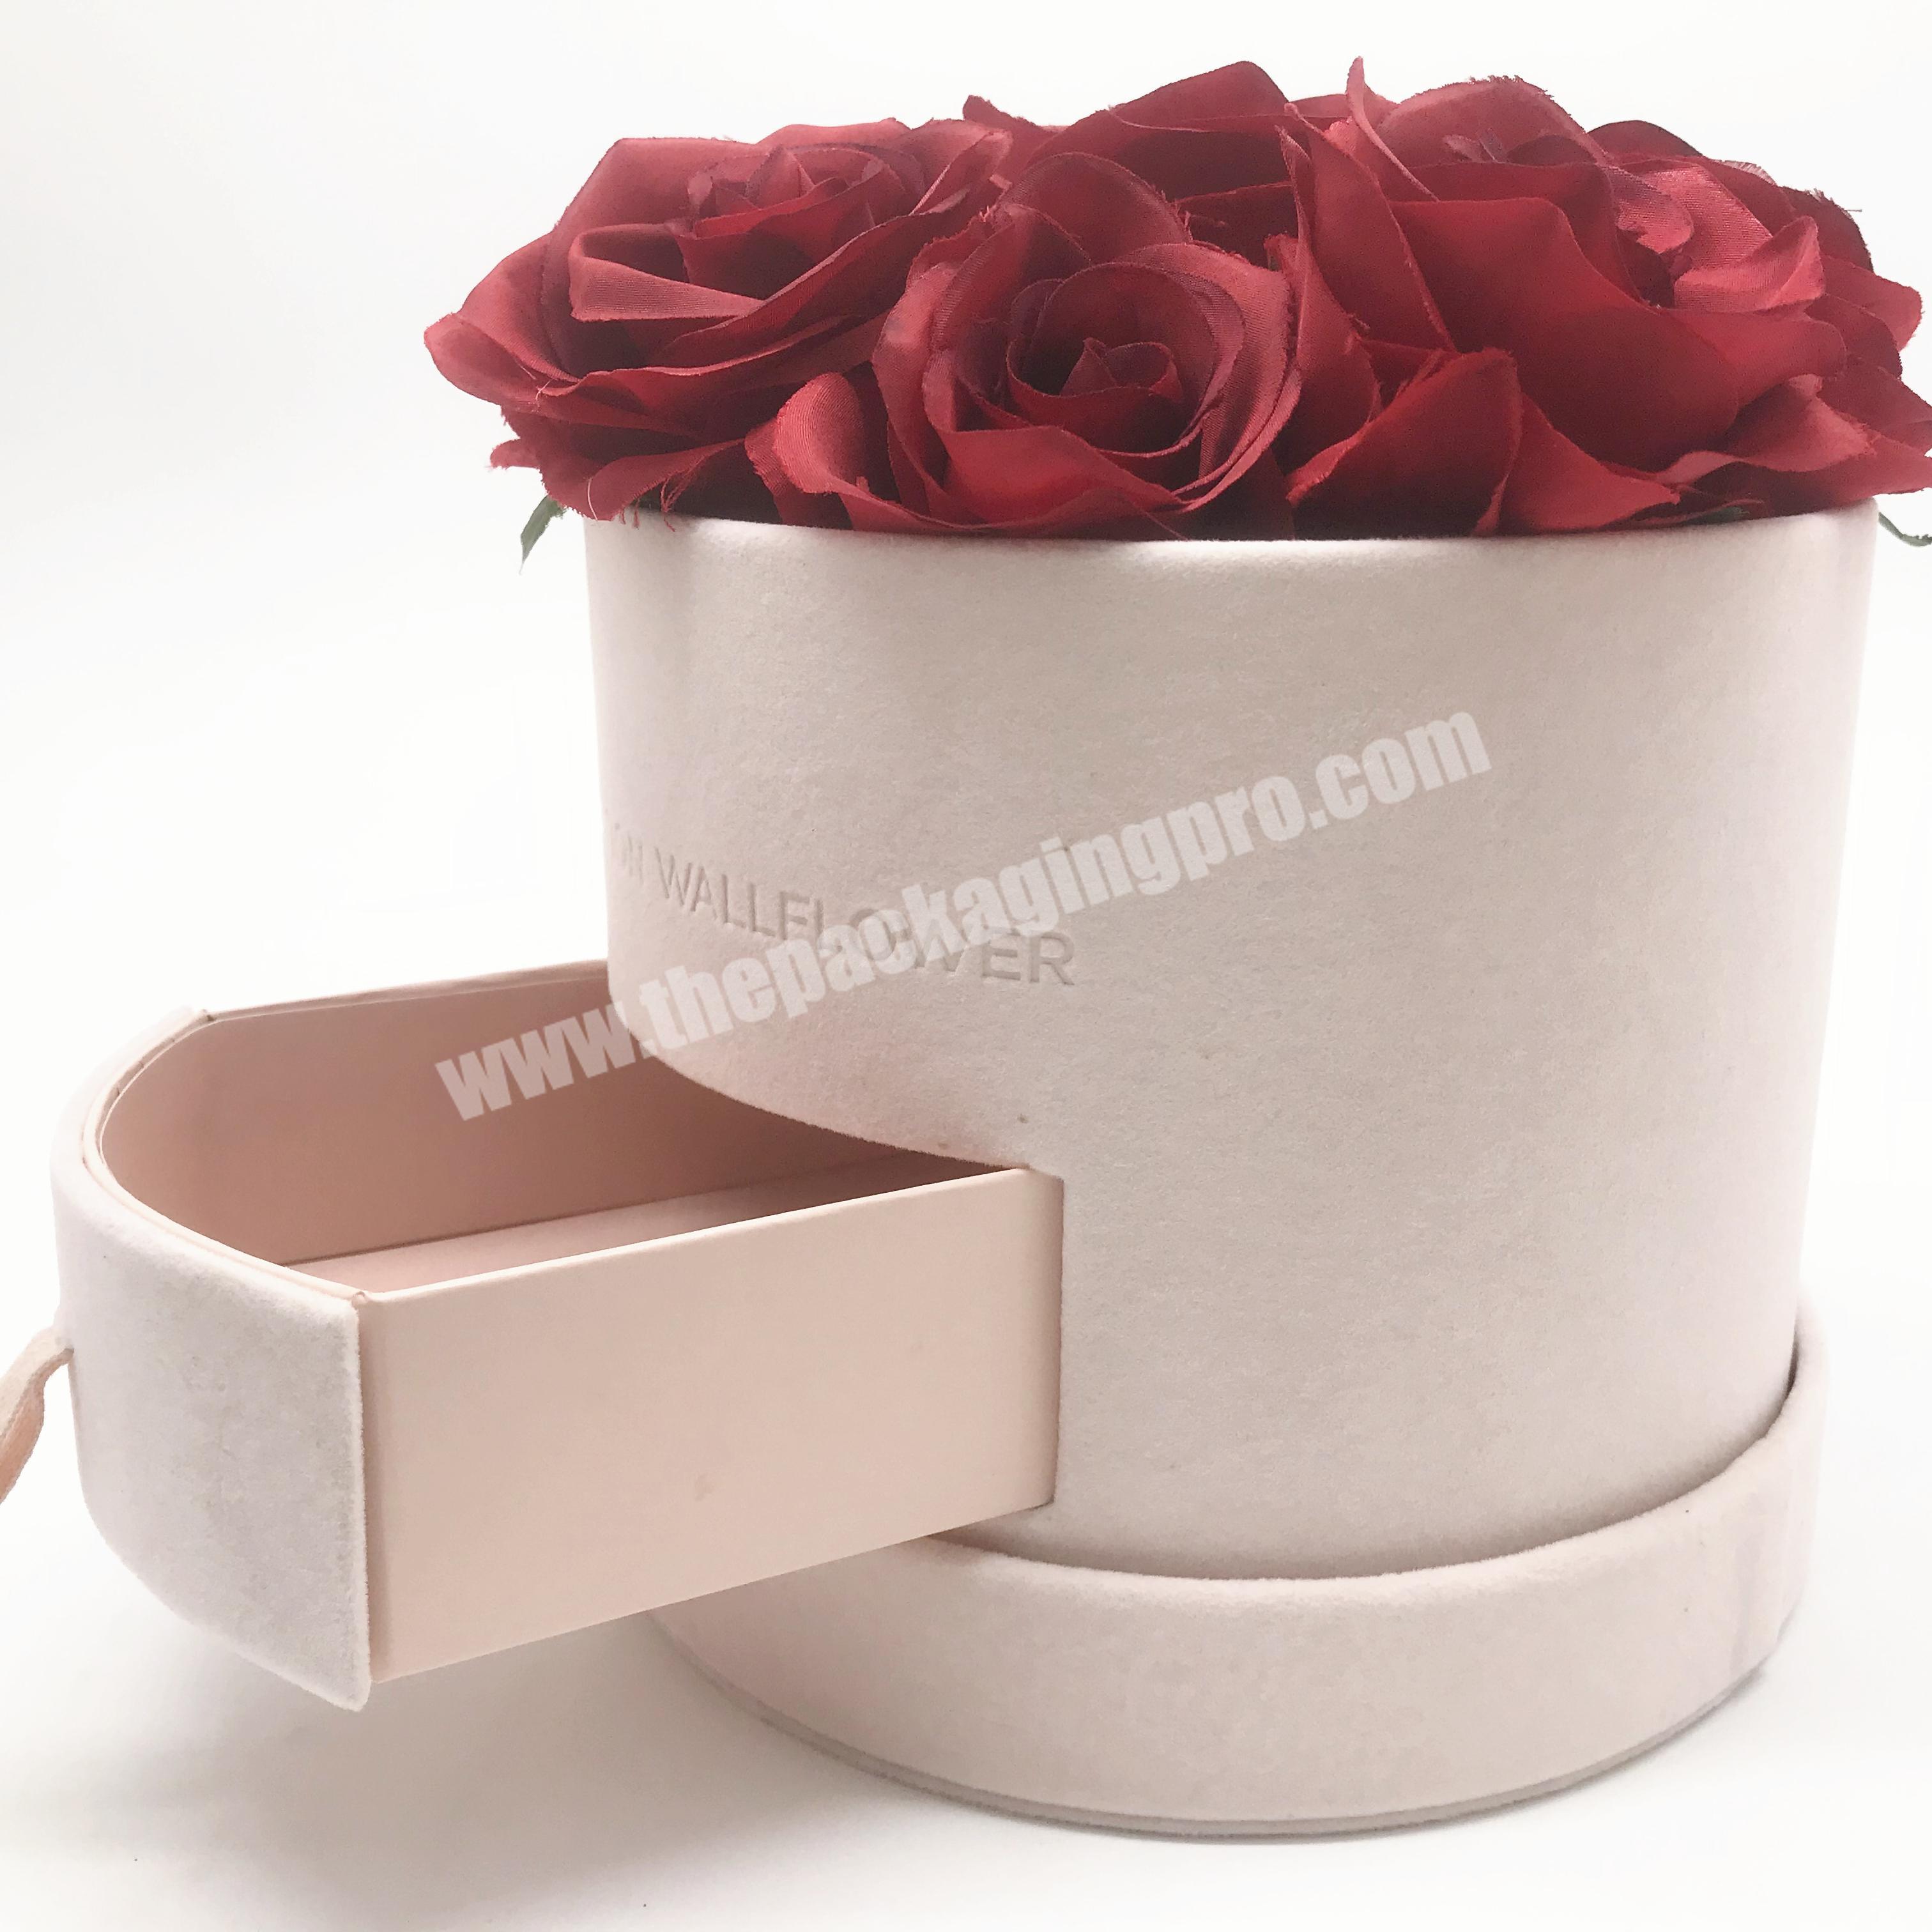 20% OFF Promotion! Take Part Gift Chocolate Flower Box with Drawer for Preserved Rose Packaging in Group Buying!! Round Velvet